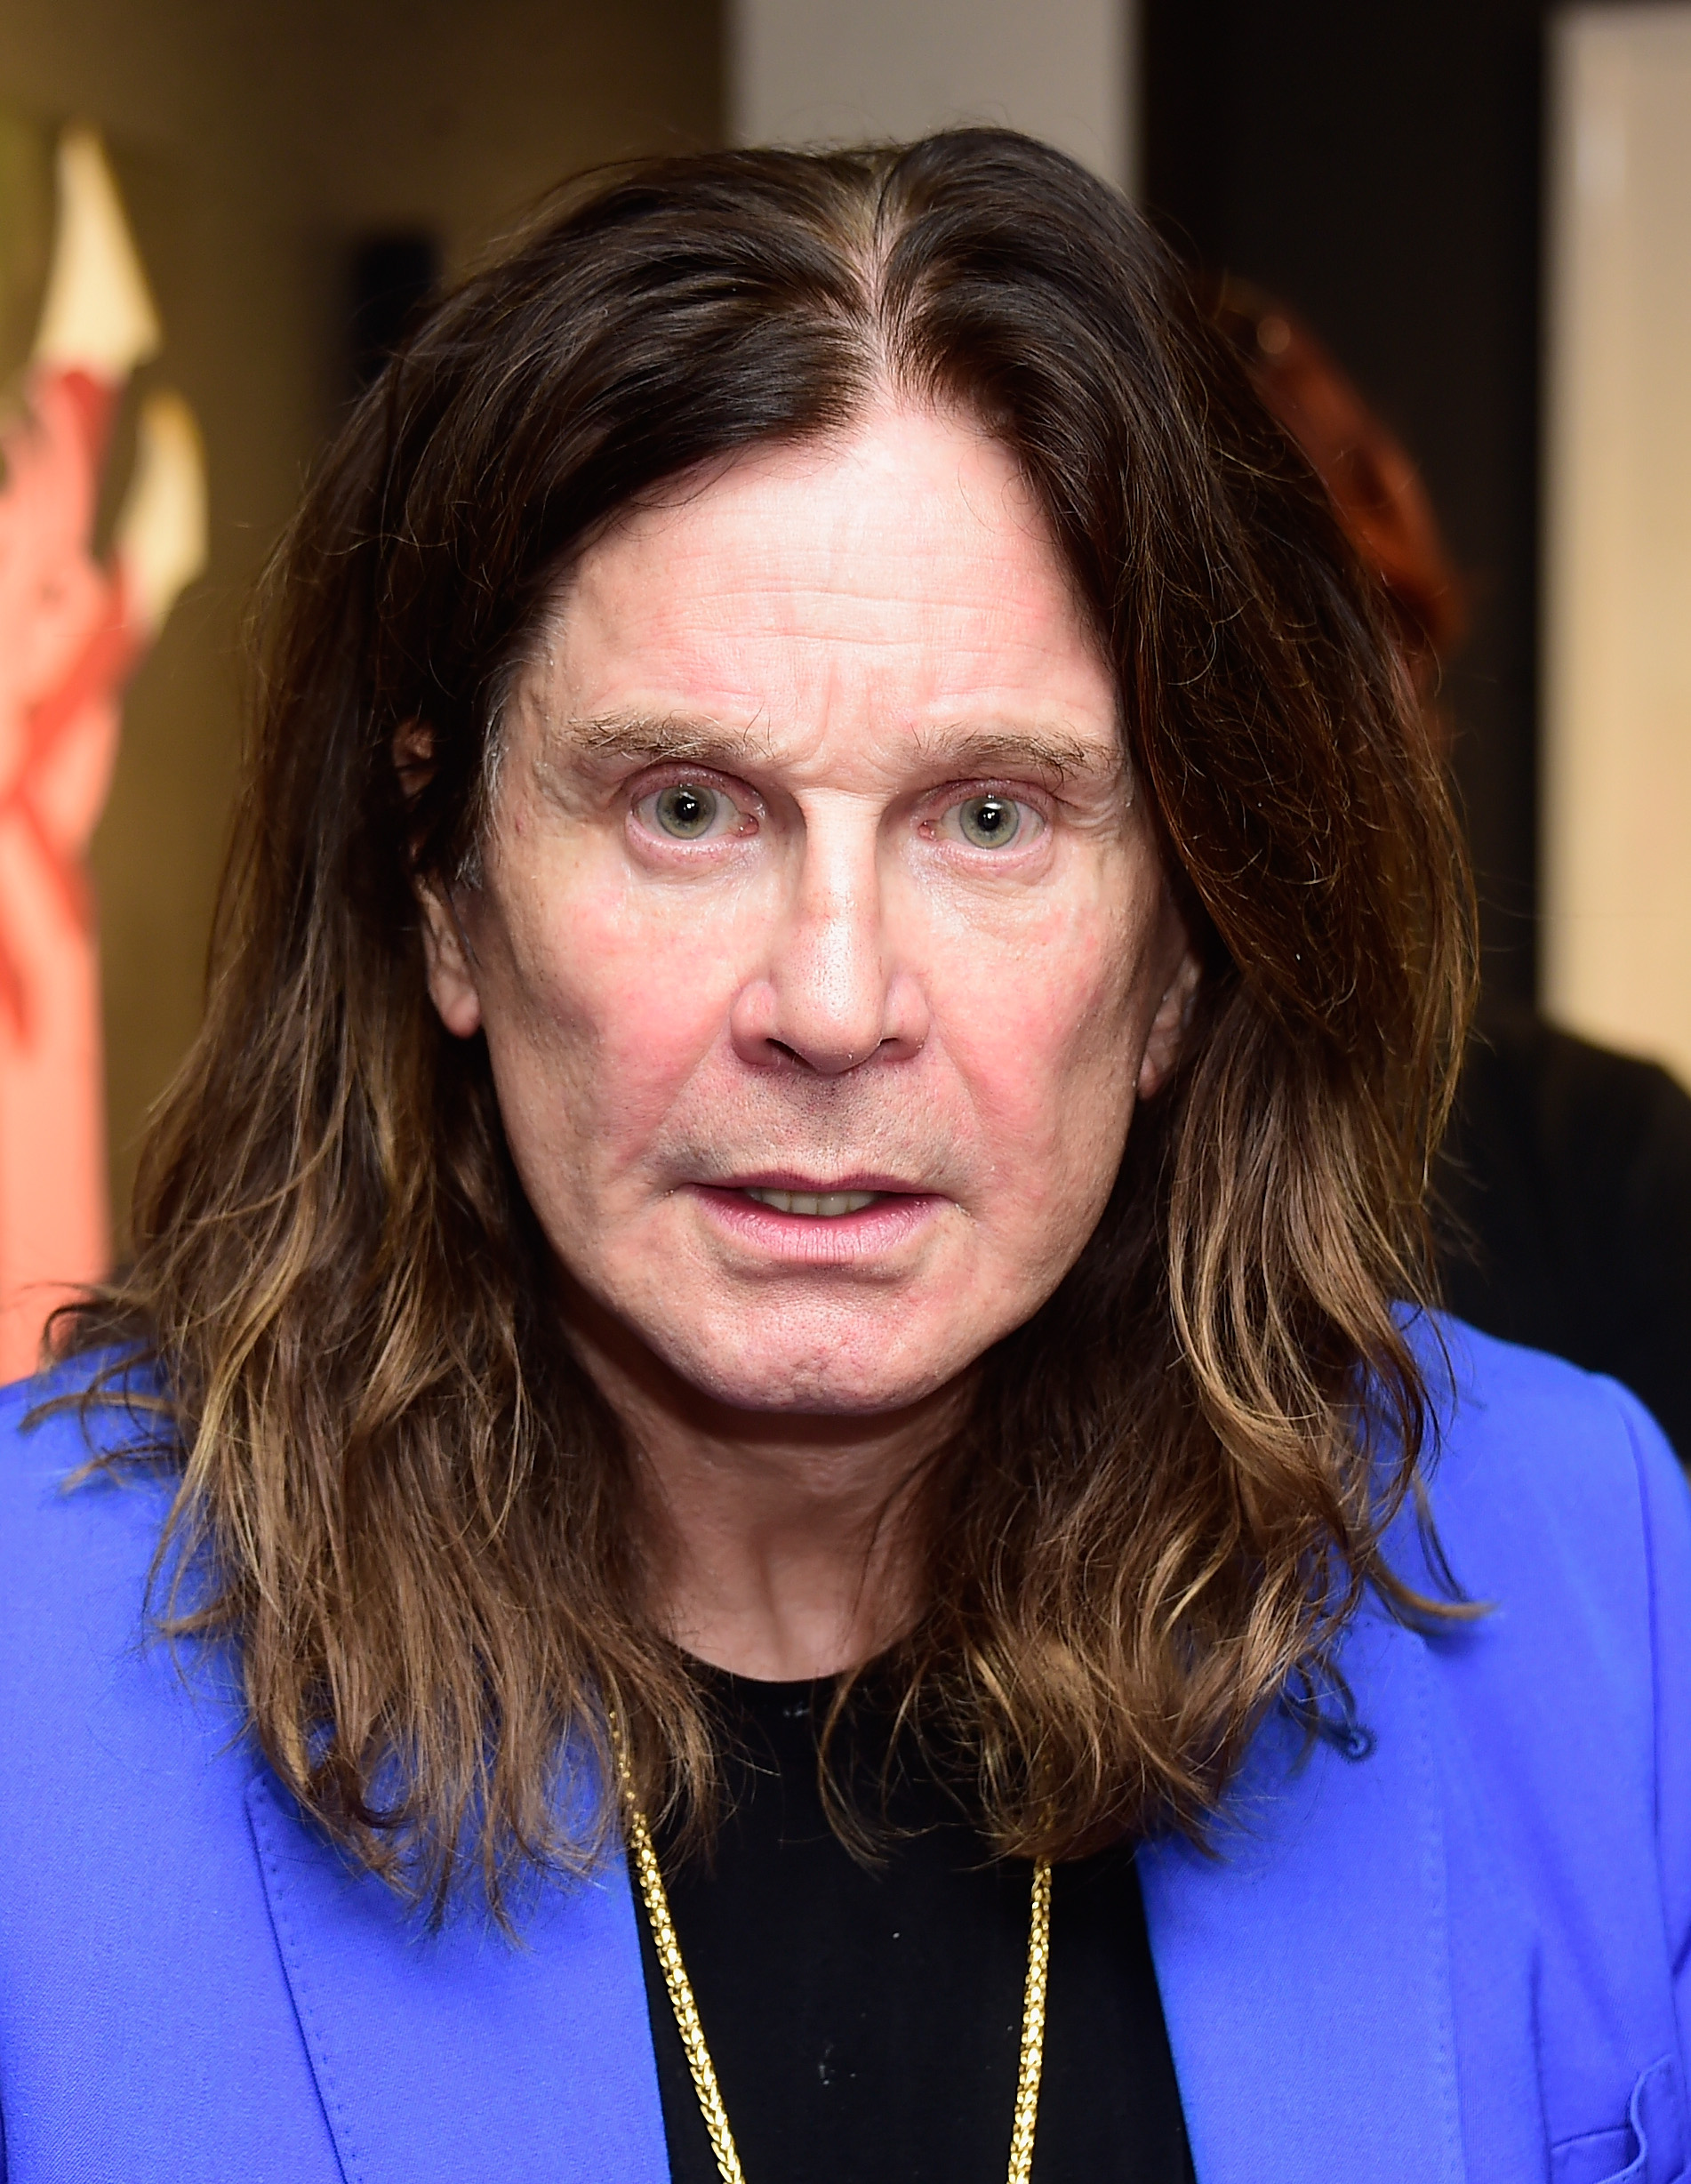 Ozzy Osbourne at the VIP opening reception for "Dis-Ease" on September 2, 2015 in Beverly Hills, California. | Source: Getty Images